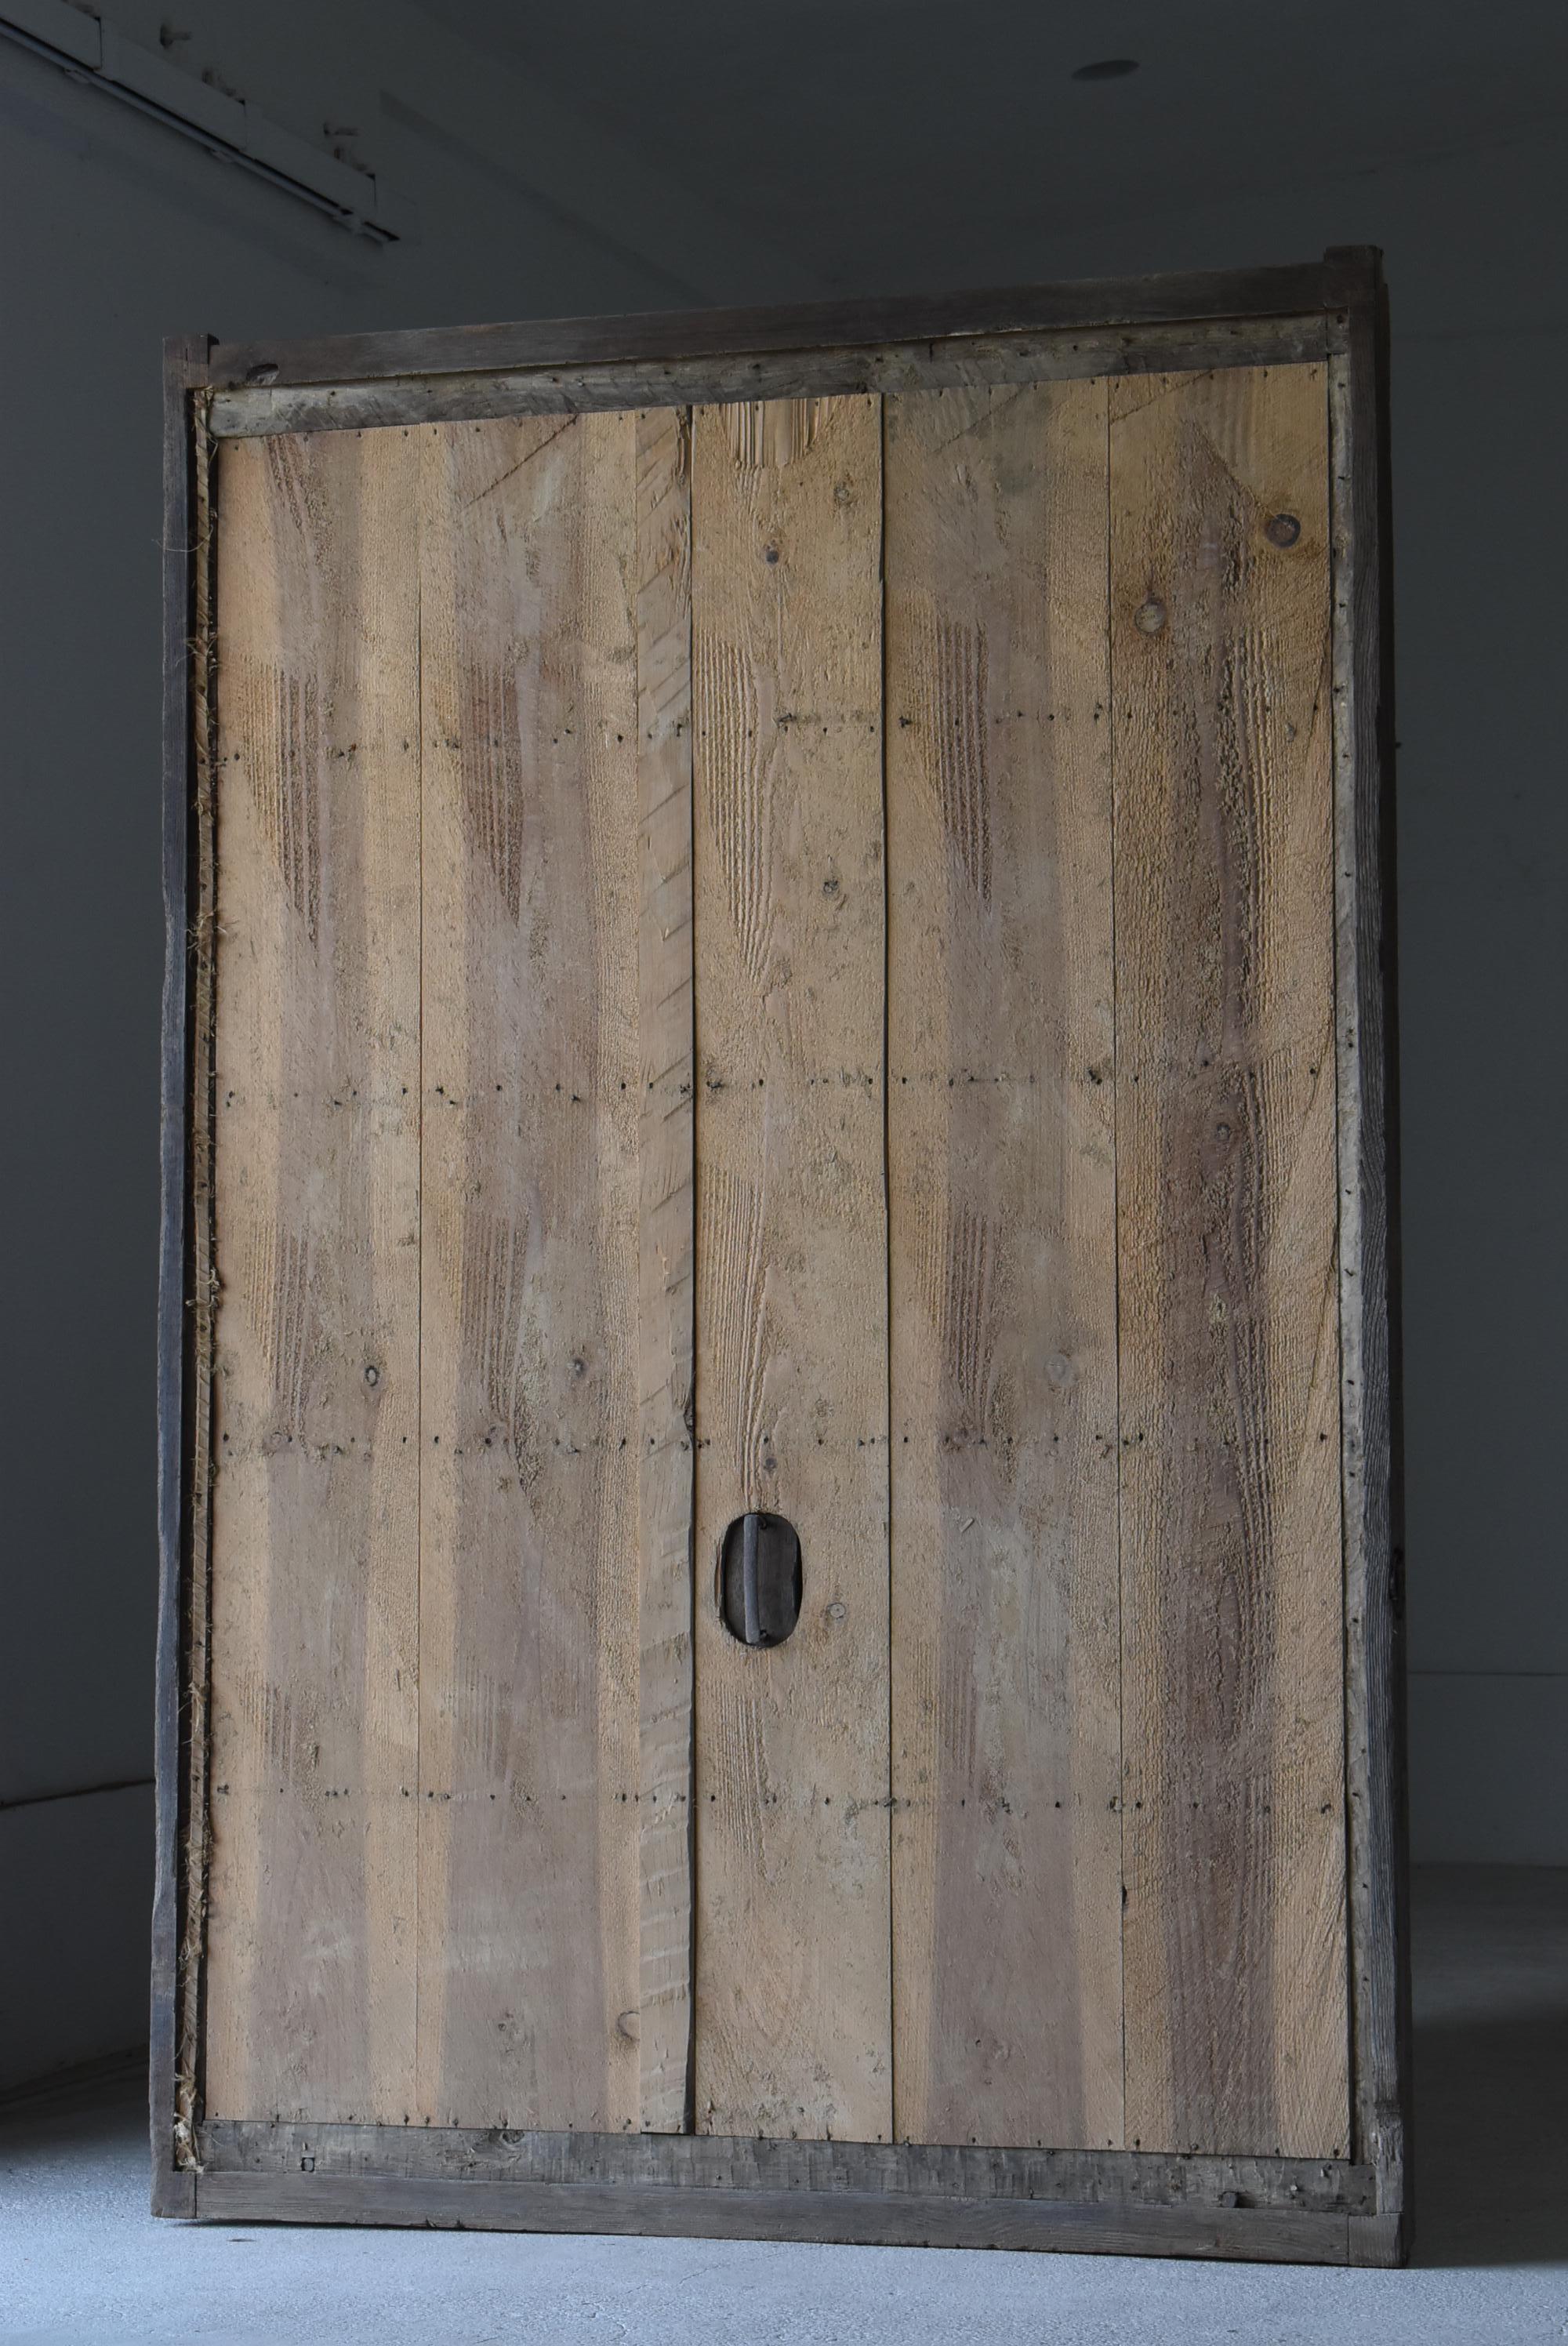 This is a huge door of a very old warehouse in Japan.
This door is from the Meiji era. (1860s-1900s).
It is mainly made of cedar wood with iron handles.

The door was made of plaster, but the plaster peeled off to reveal this appearance.
It is as